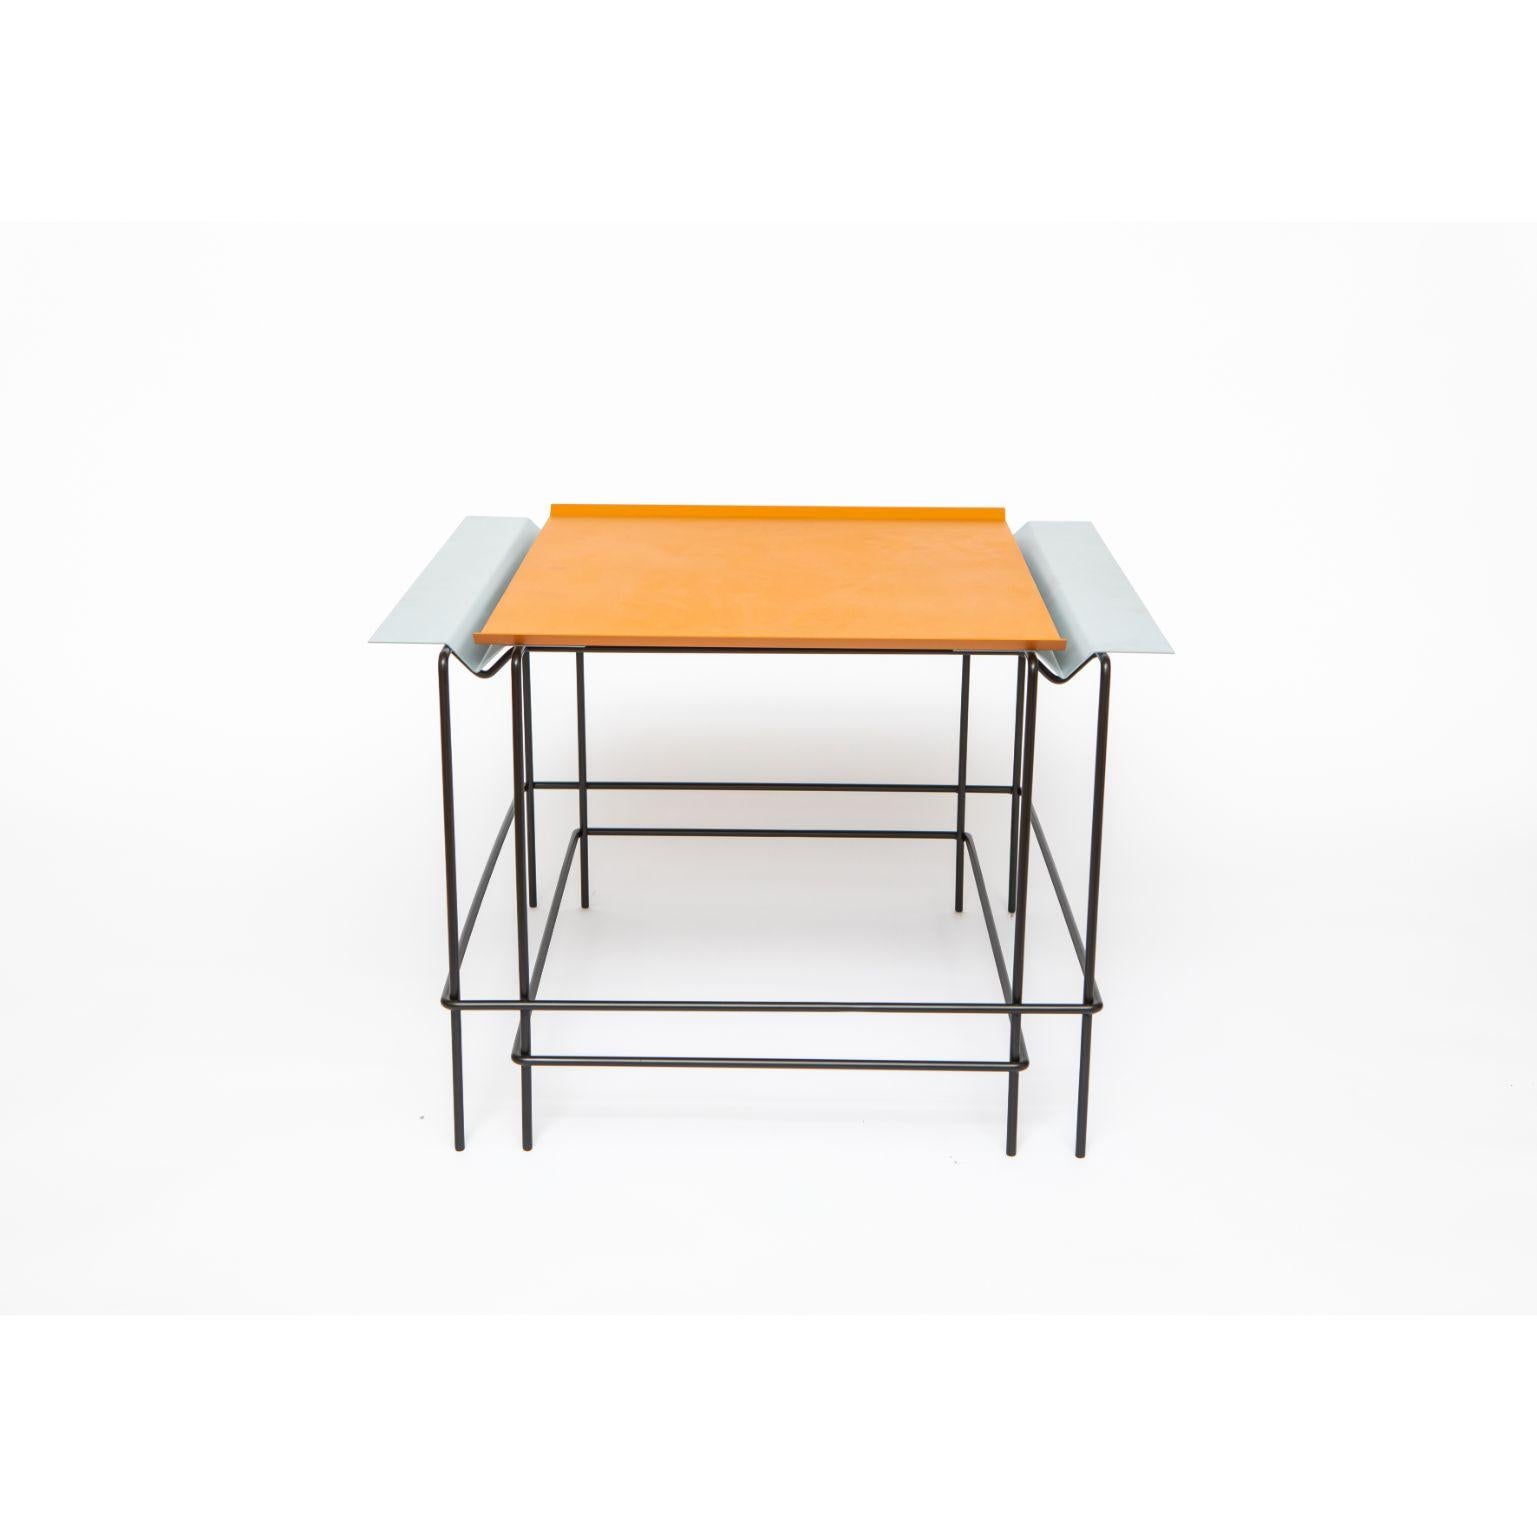 Leva 40 - Table by Alva Design
Materials: Painted metal, stainless steel
Dimensions: 60 x 40 x 59 cm

ALVA is a furniture and objects design office, formed by brothers Susana Bastos, artist and designer, and Marcelo Alvarenga, architect. Their